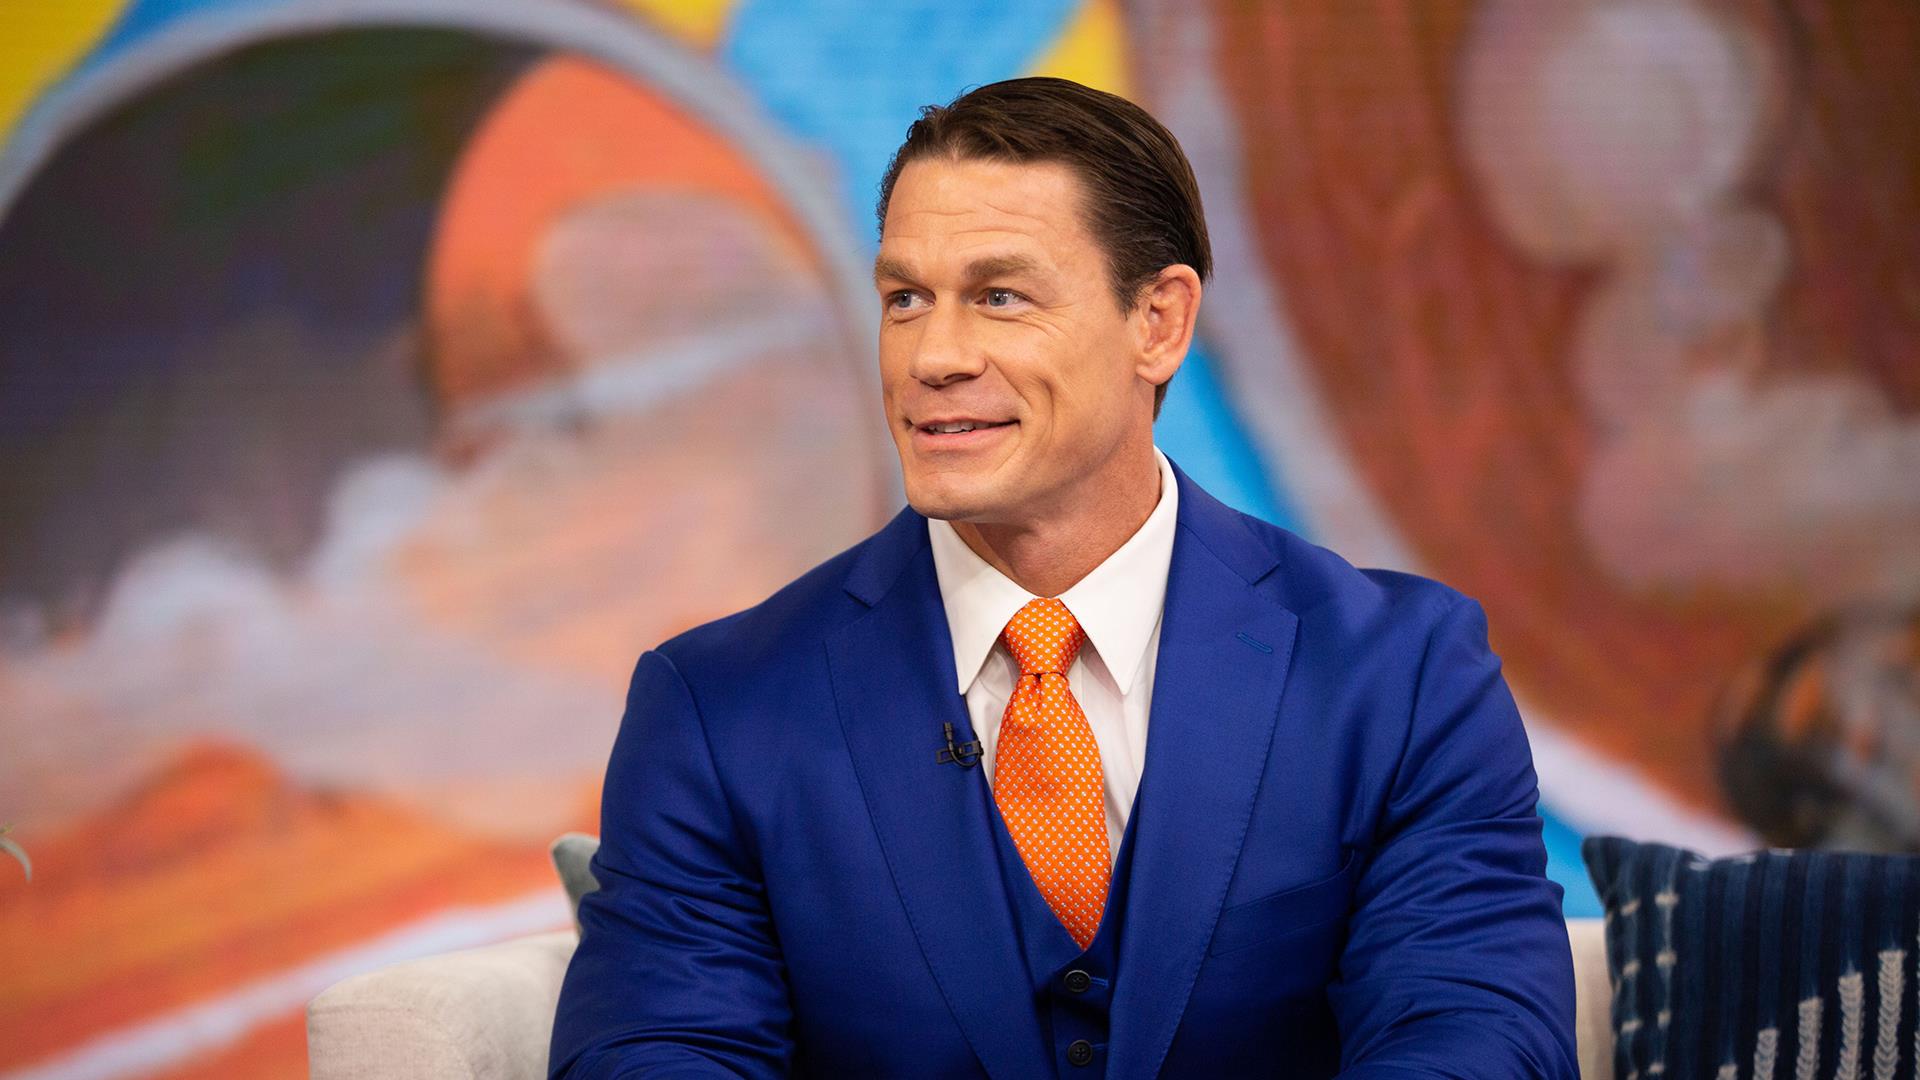 John Cena pays tribute to Irrfan Khan and Rishi Kapoor by sharing photos of  late Bollywood stars on Instagram earns interesting reaction from fans   Hindi Movie News  Times of India